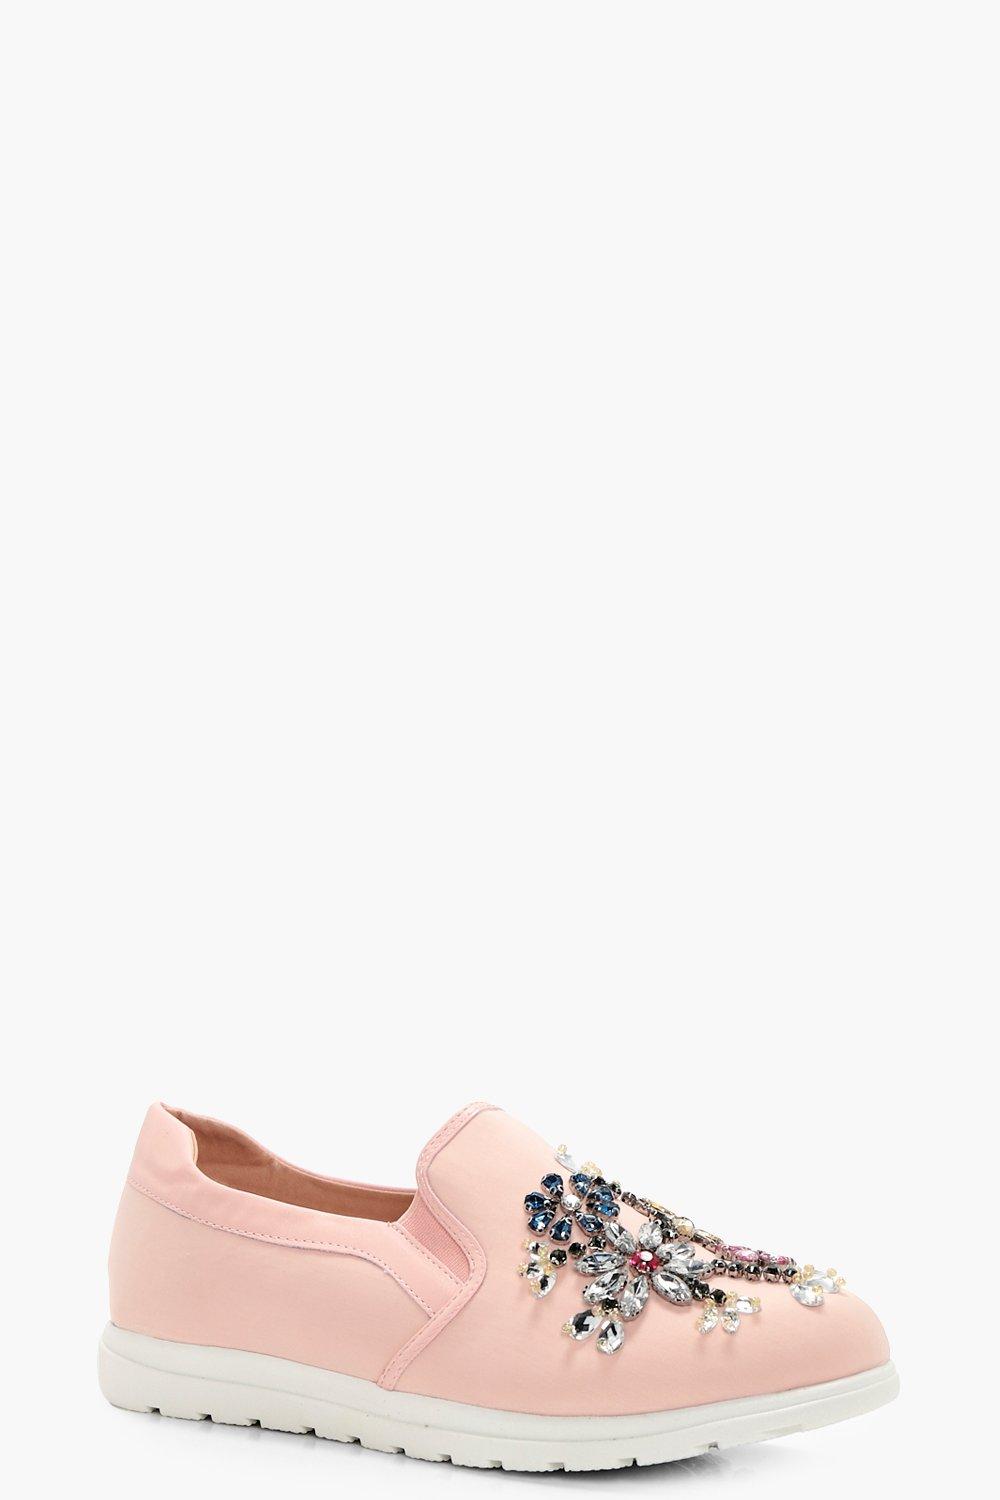 leah slip on embellished trainers